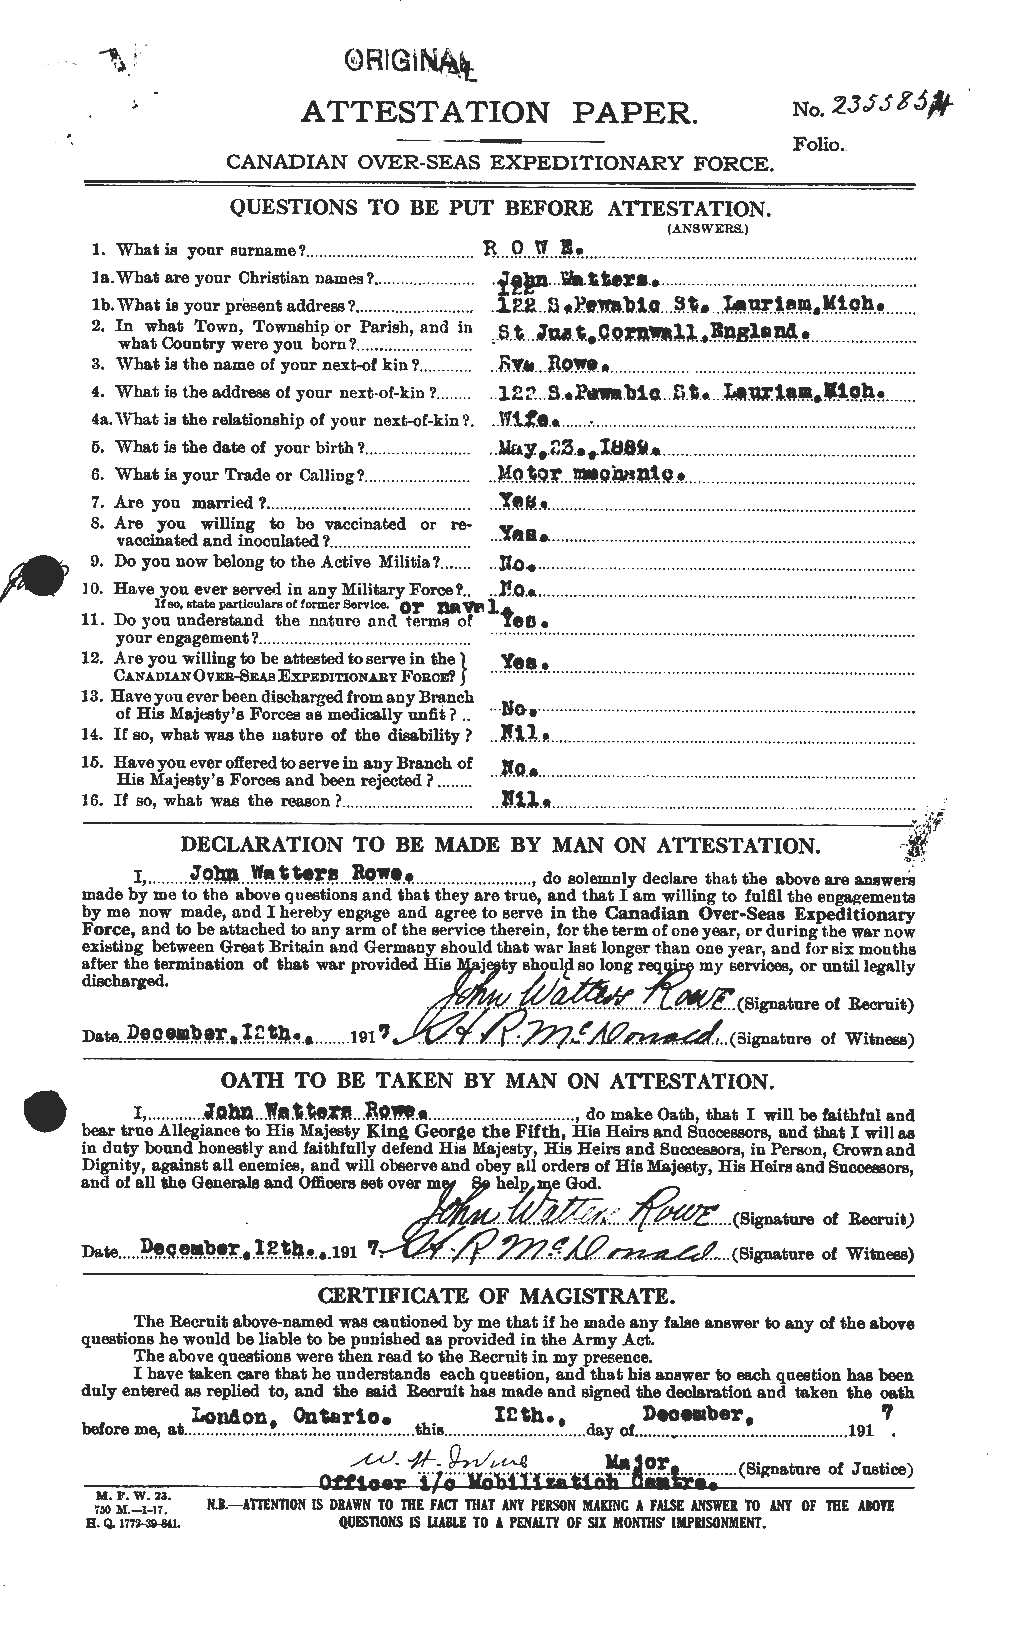 Personnel Records of the First World War - CEF 615936a